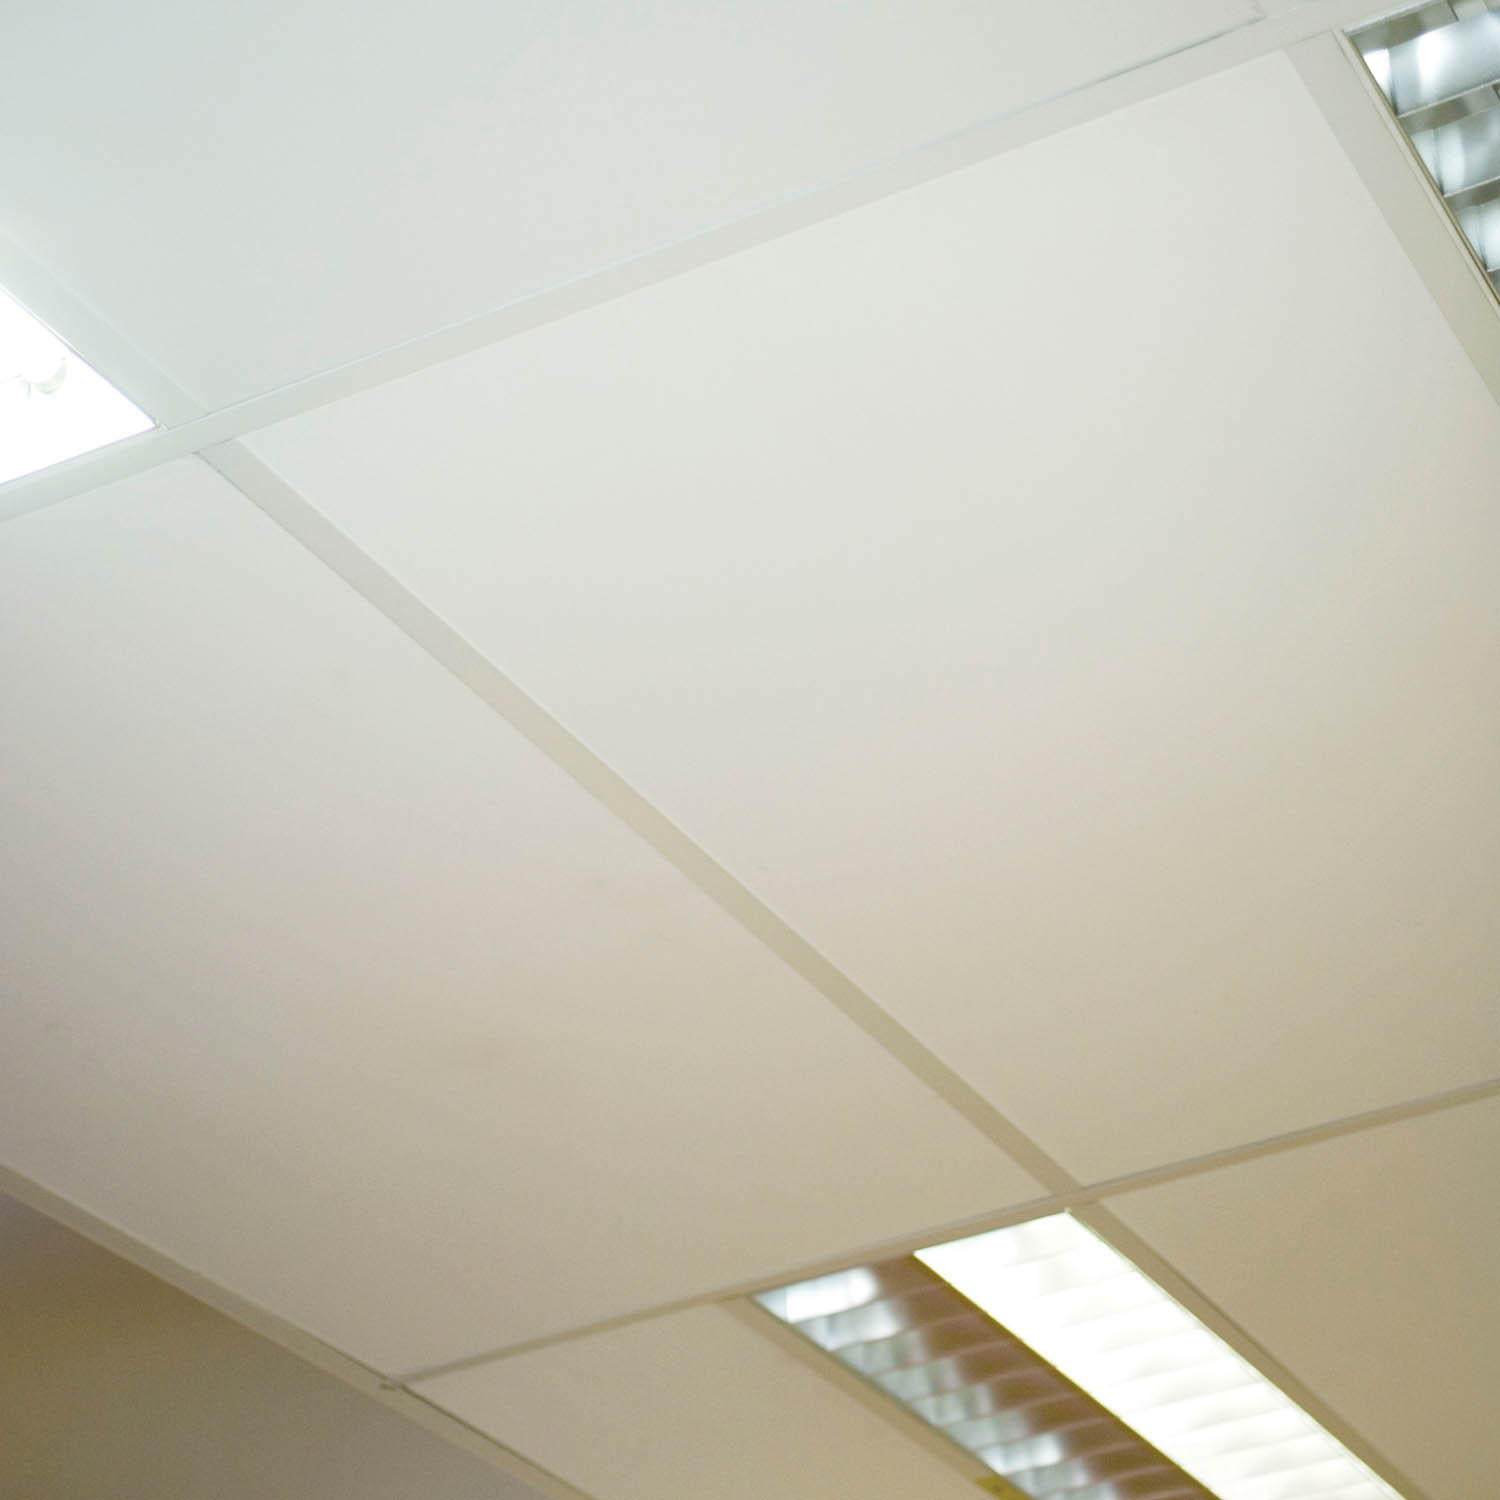 Supatone Ceiling Tiles For Exposed Grid Systems